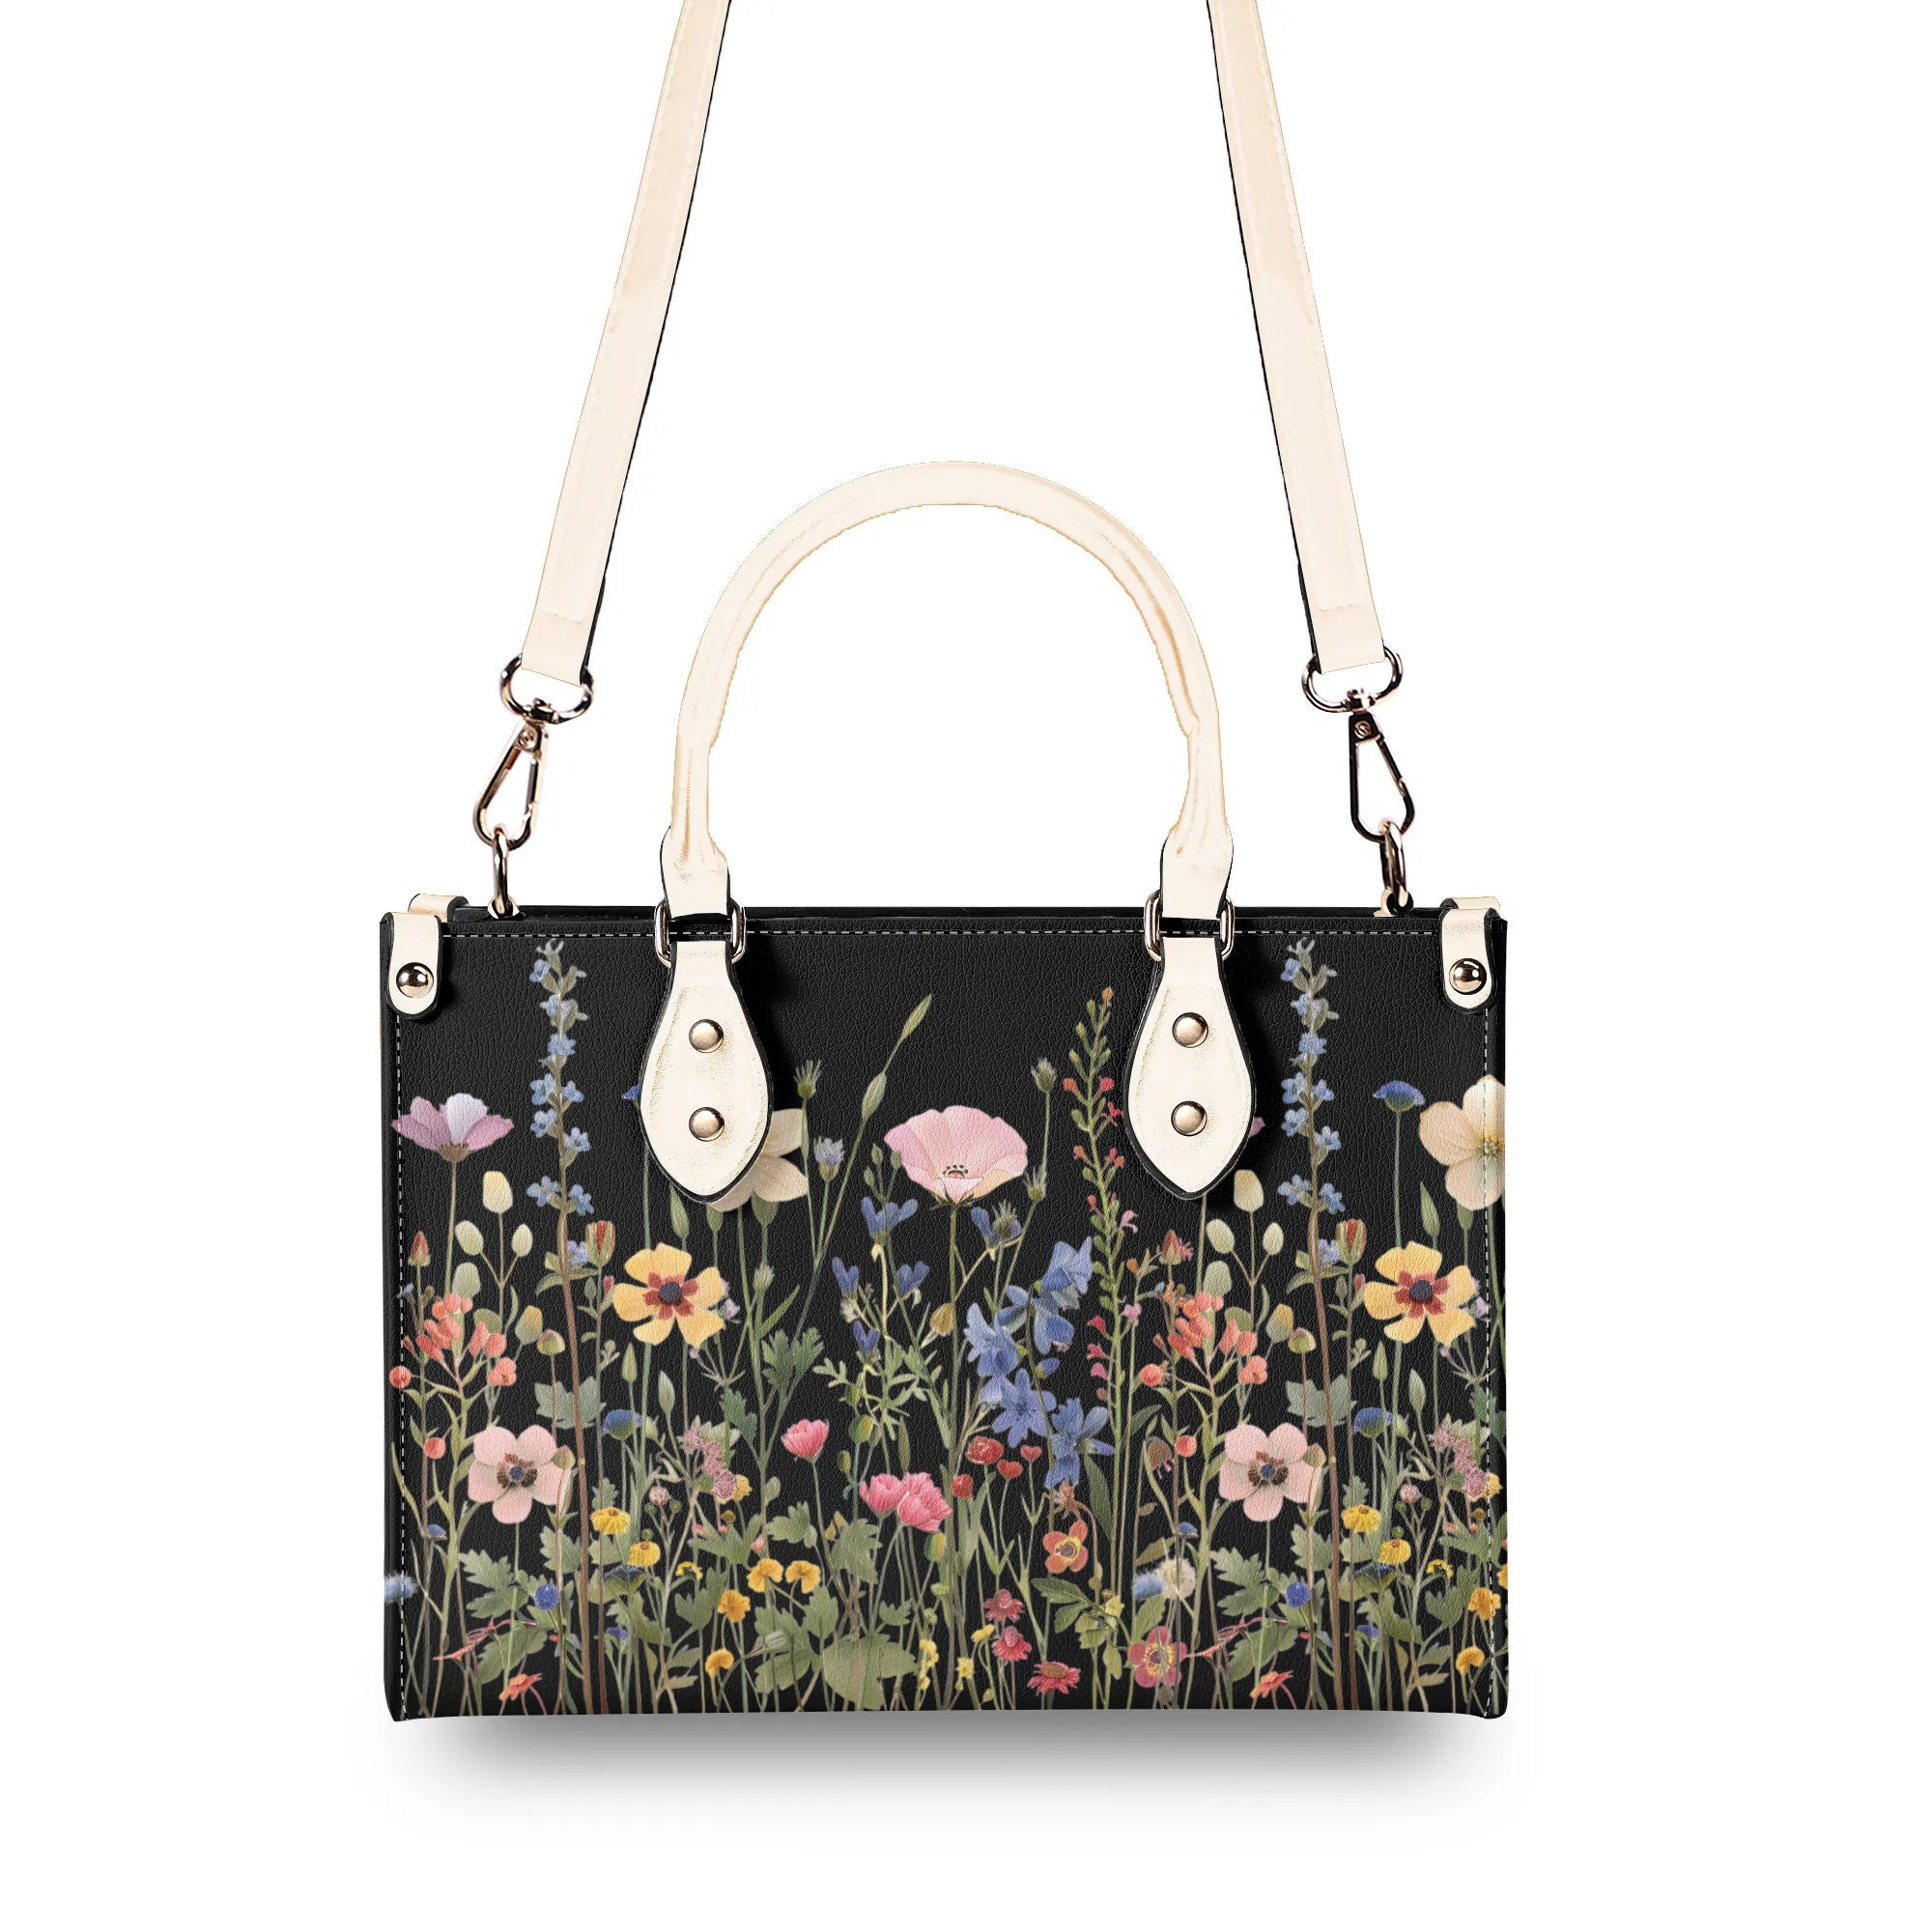 Bloom in Style: The Floral Chic Leather Tote Bag,  Waterproof PU Leather Handbag